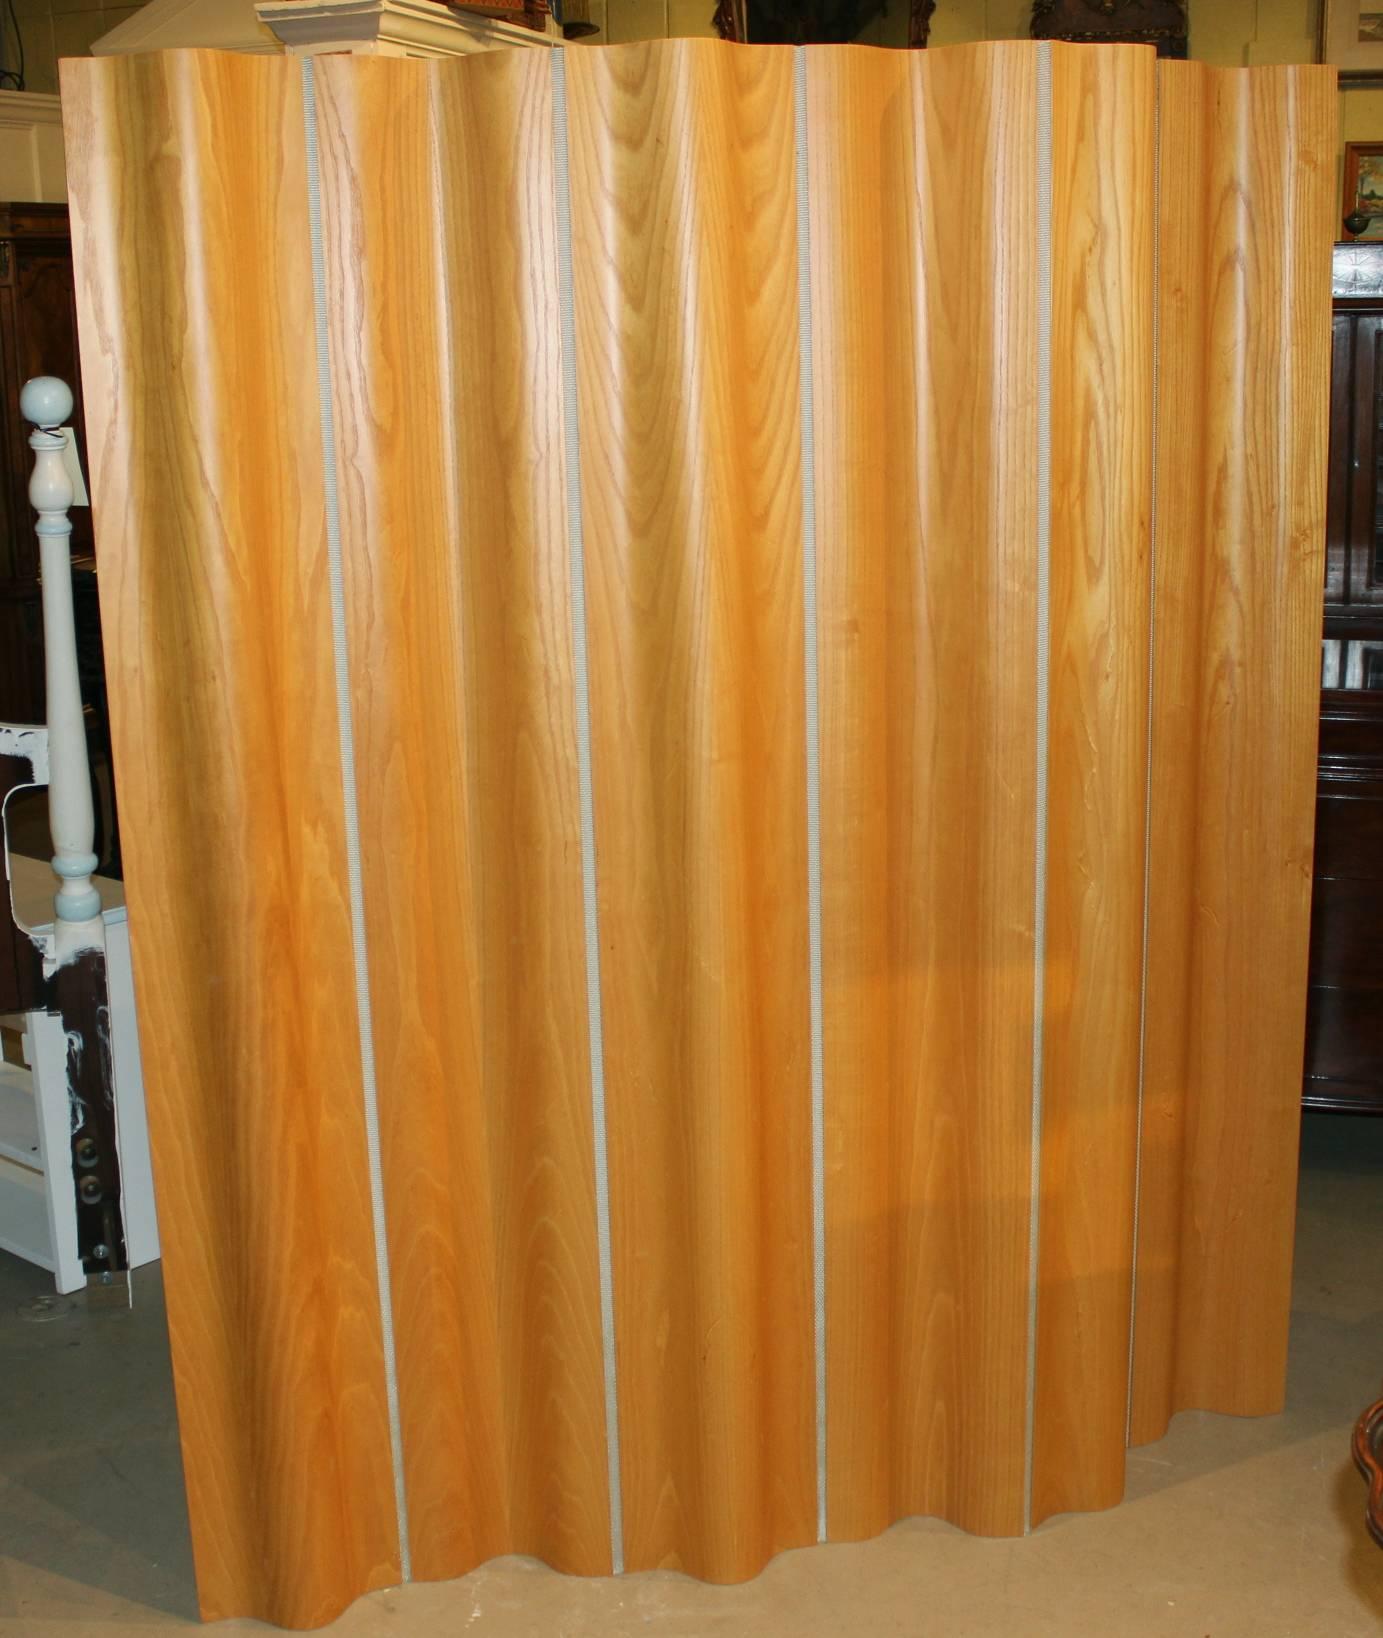 20th Century Eames Birch Plywood Six Panel Folding Screen for Herman Miller